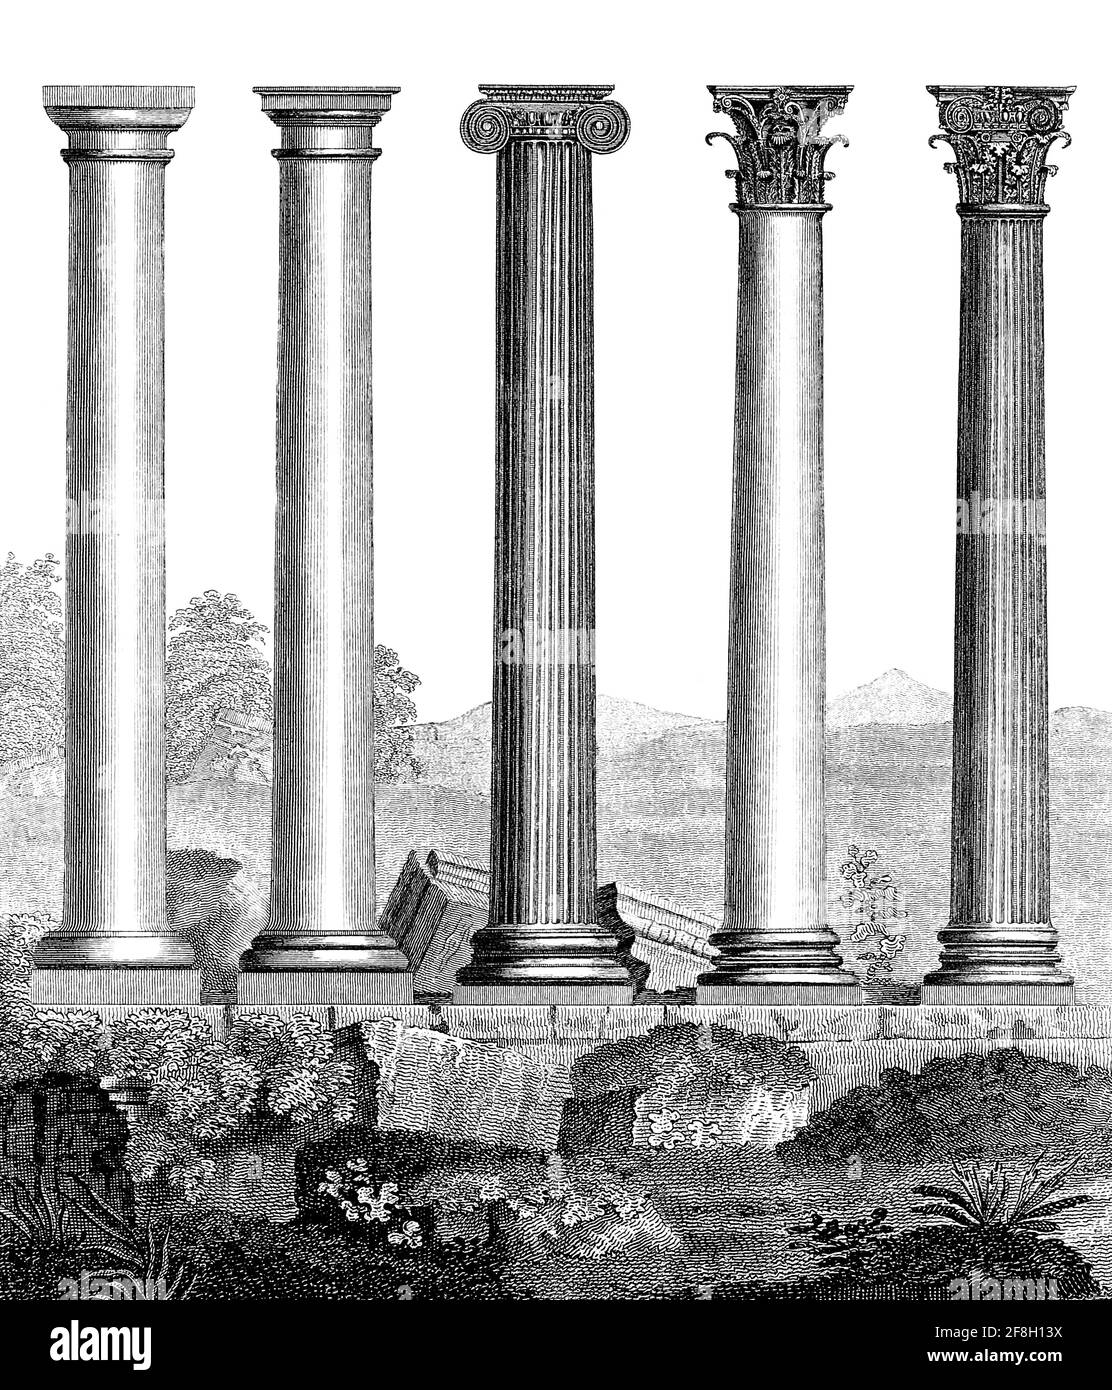 Copperplate engraving of a Comparative view of the Five Orders of Architecture From the Encyclopaedia Londinensis or, Universal dictionary of arts, sciences, and literature; Volume II;  Edited by Wilkes, John. Published in London in 1810 Stock Photo